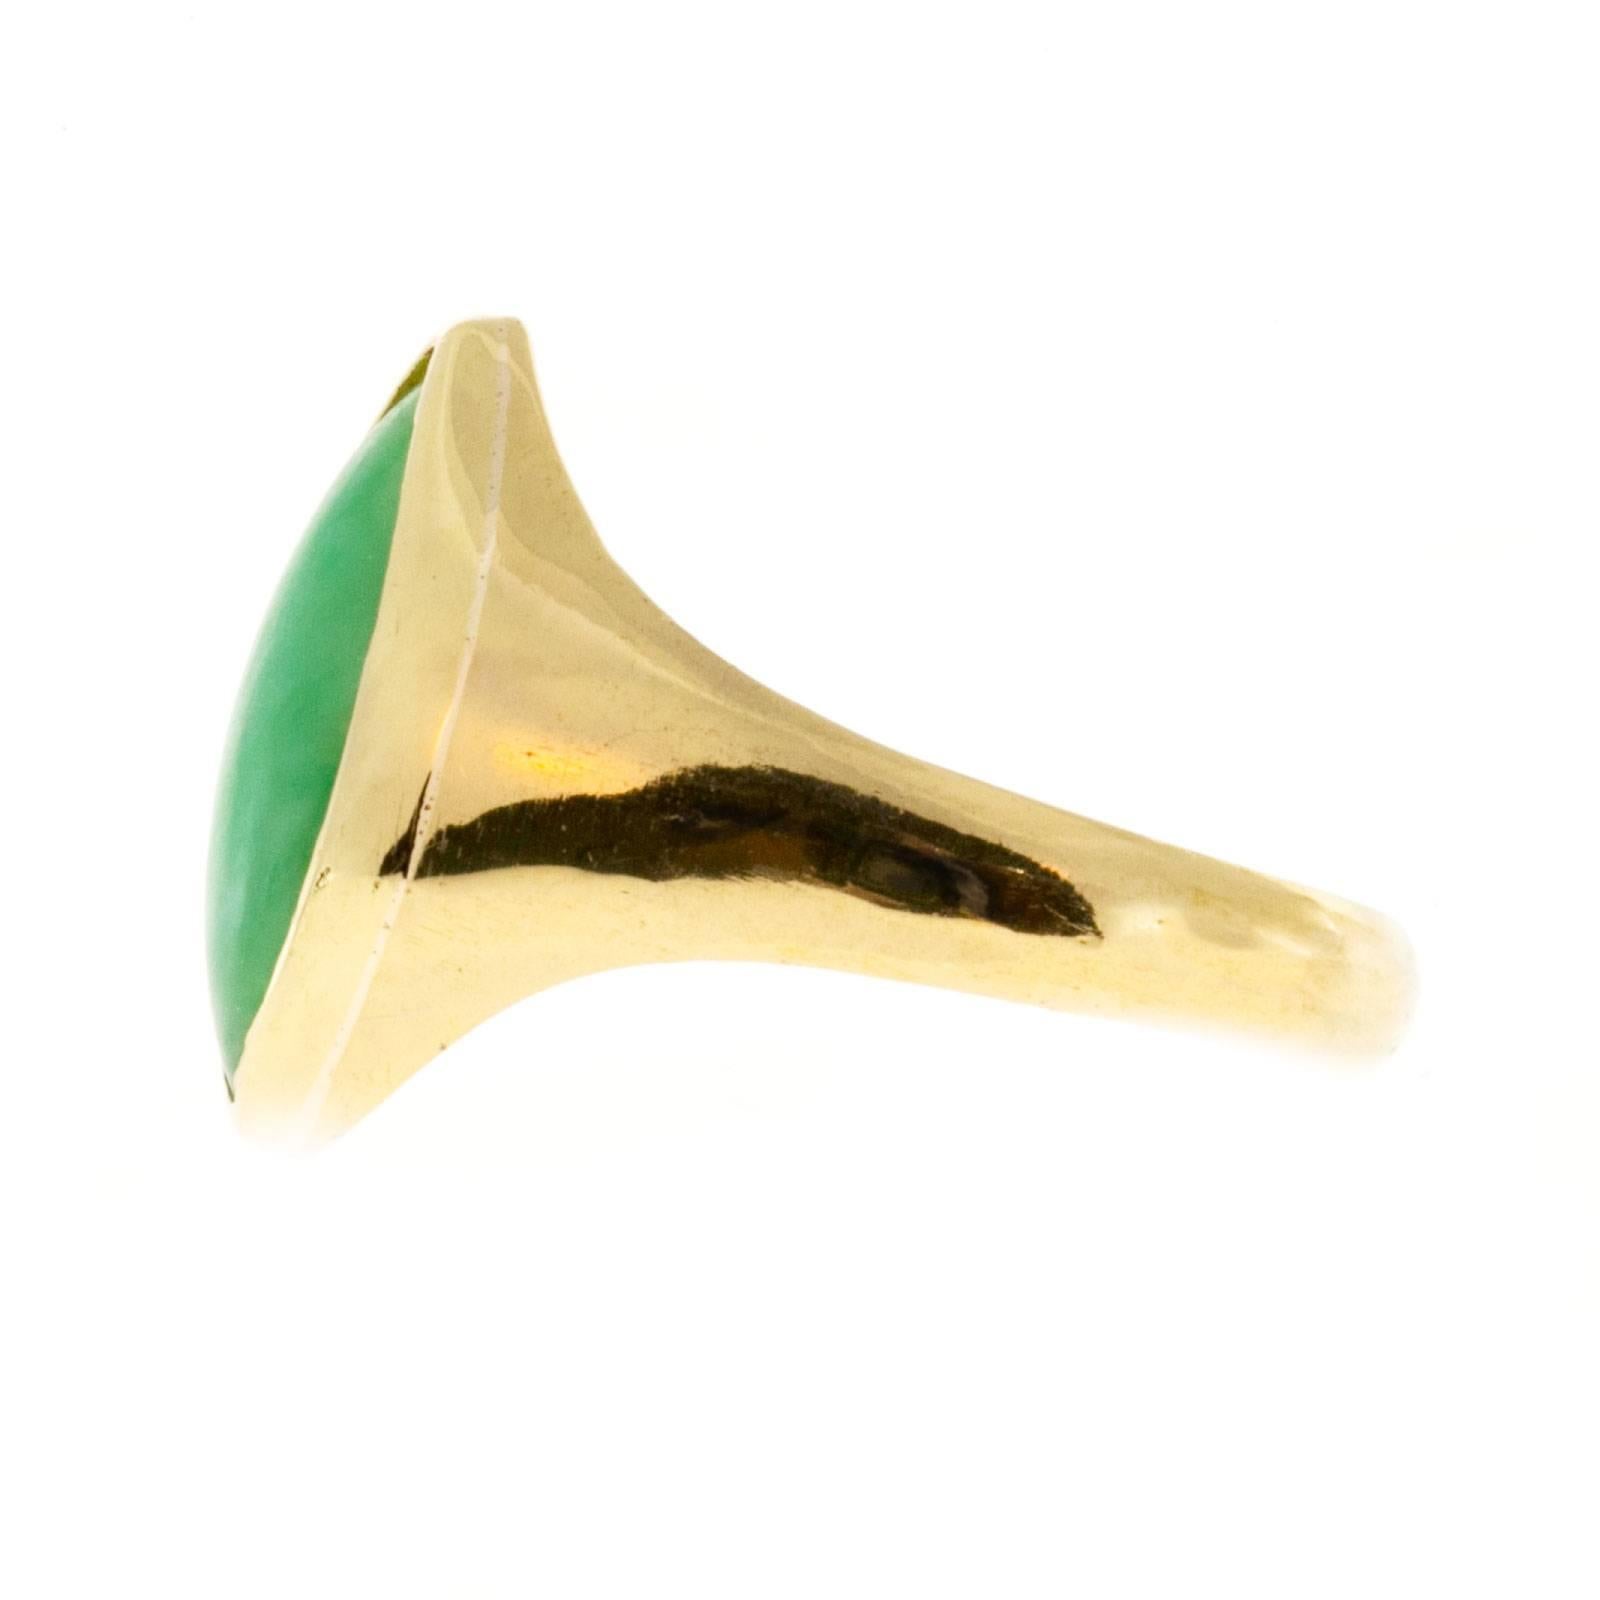 A grade natural color Jadeite Jade in a yellow gold gold ring. The stone was recently polished and the GIA certificate shows this. The color is all natural.

Translucent 13.50 x 6.40 x 2.50mm Marquise GIA certificate # 2145296415, GIA certified